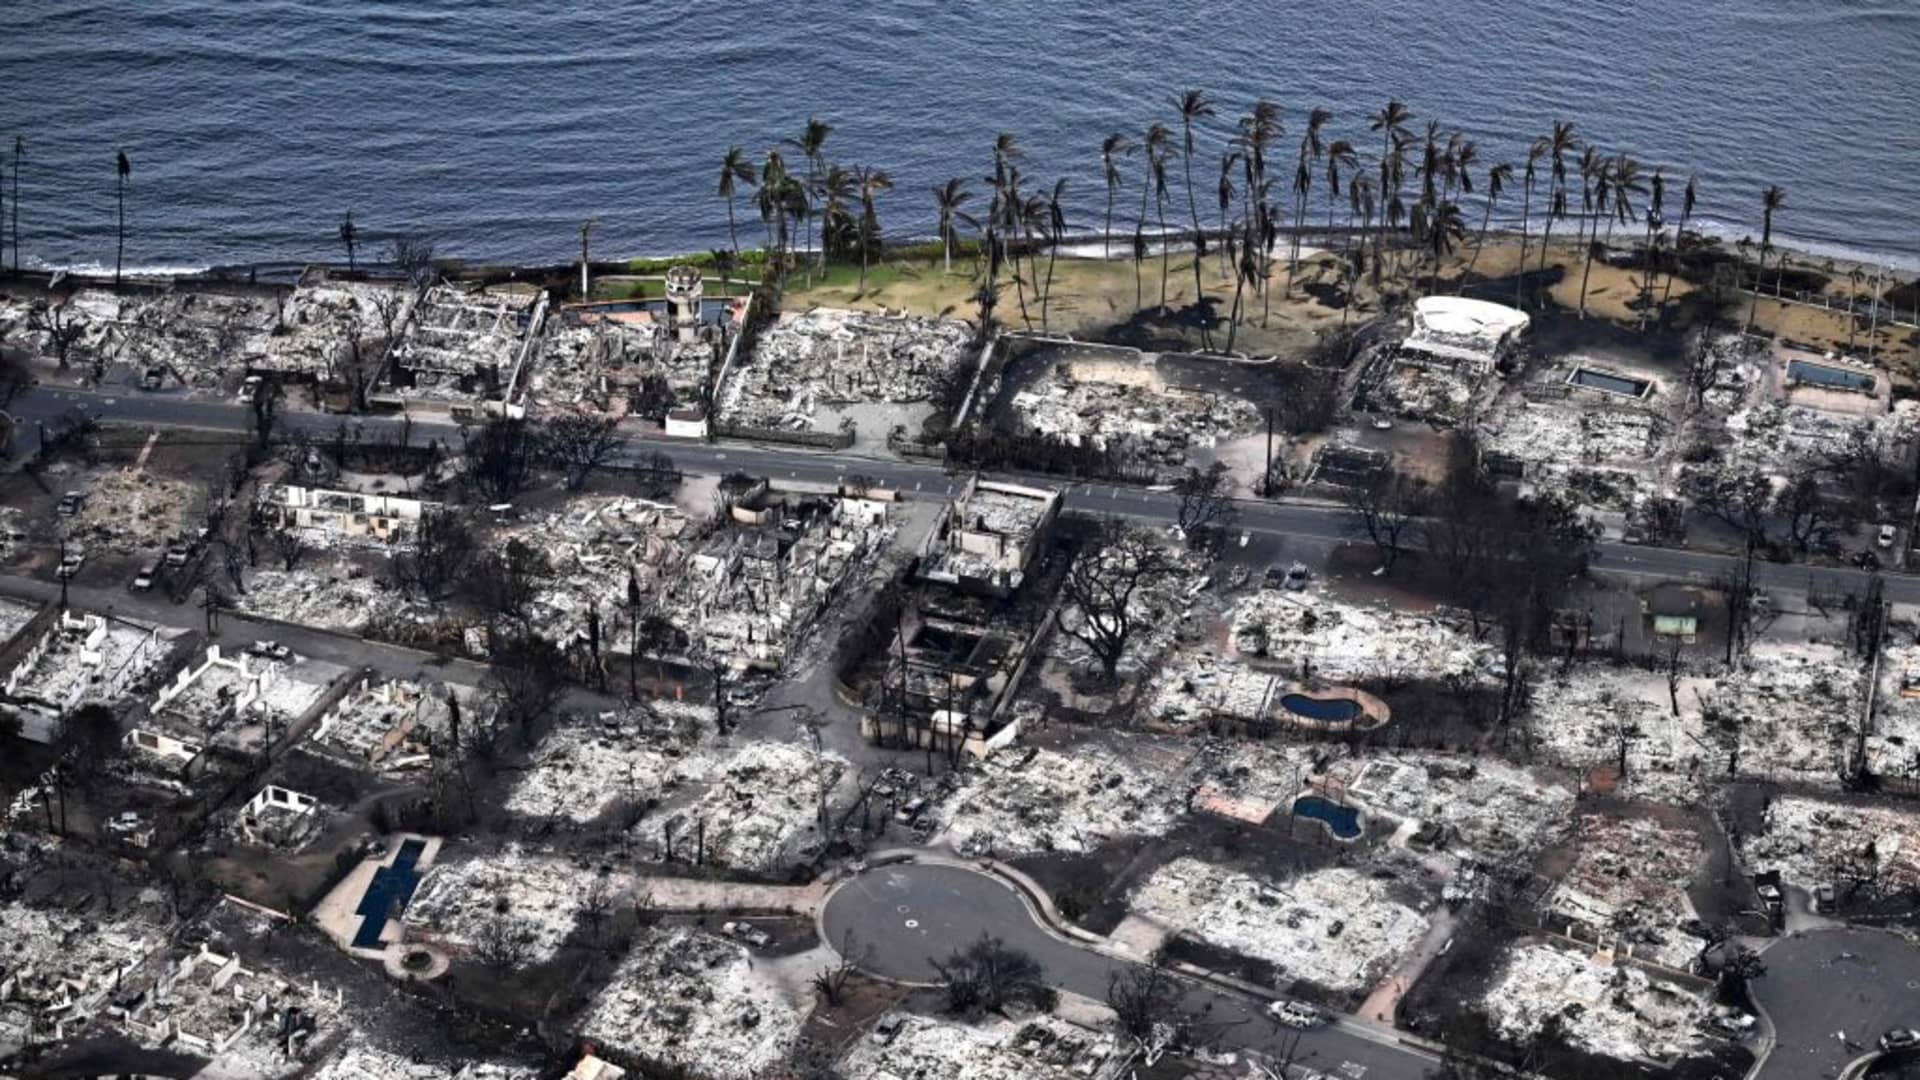 Aerial photos present total destruction as wildfires ravage ancient Lahaina, Hawaii